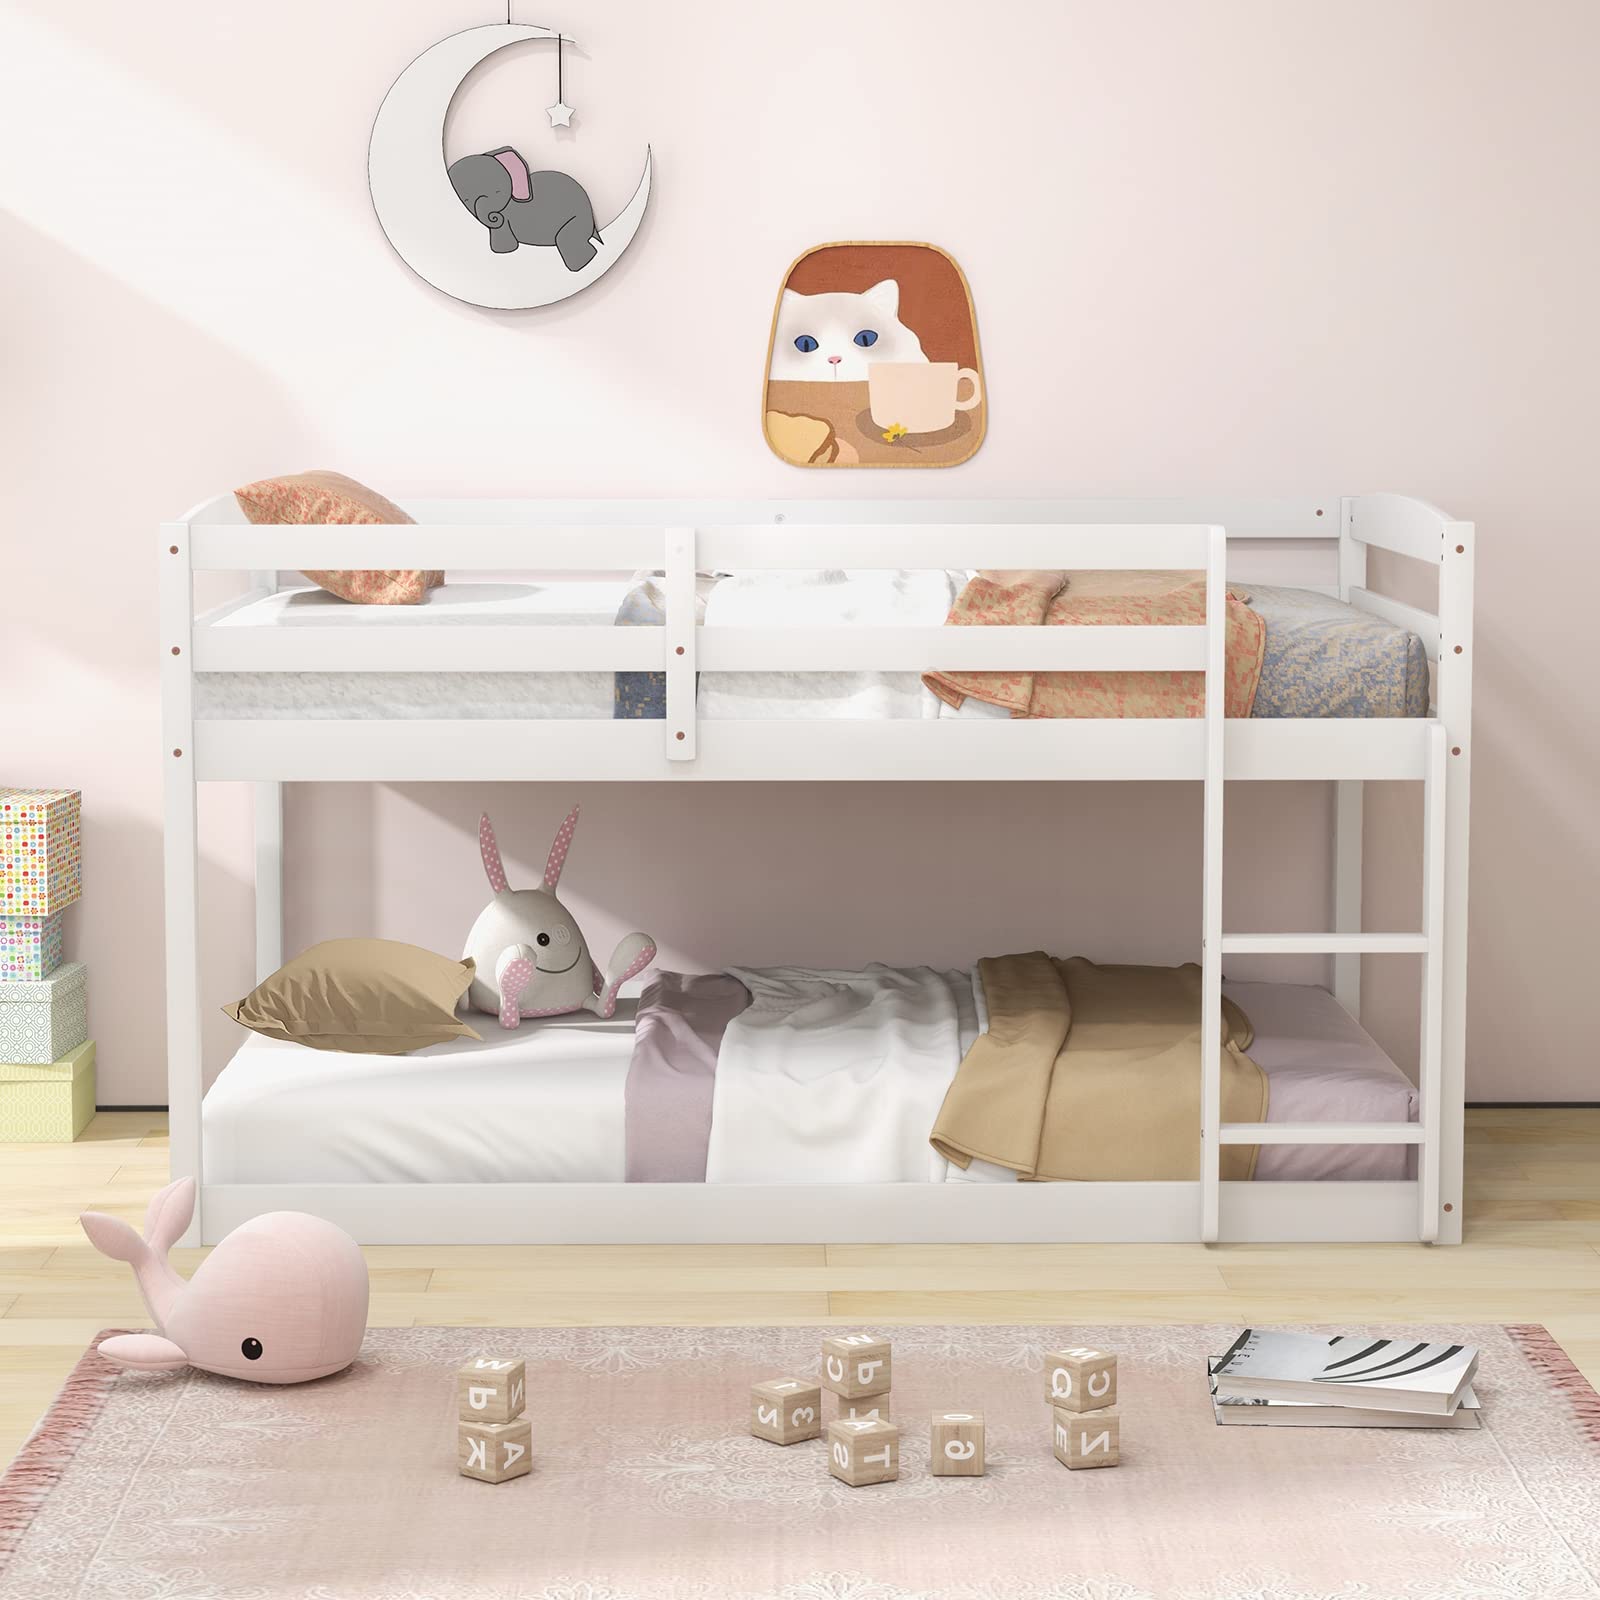 Giantex Twin Low Bunk Bed, Solid Wood Twin Over Twin Bunk Bed Frame with Full Guardrails & Integrated Ladder